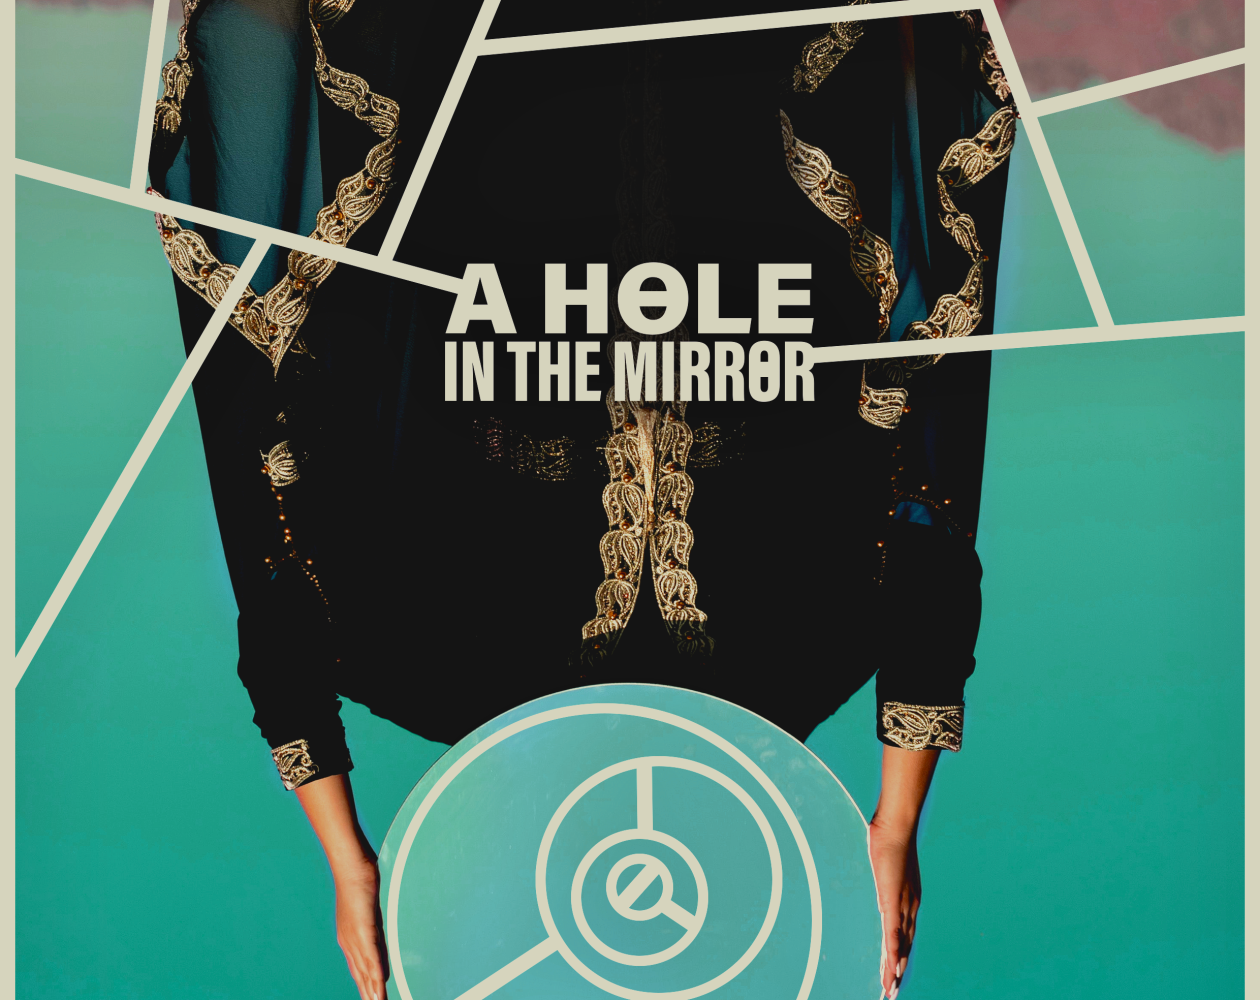 The cover for A Hole in the Mirror